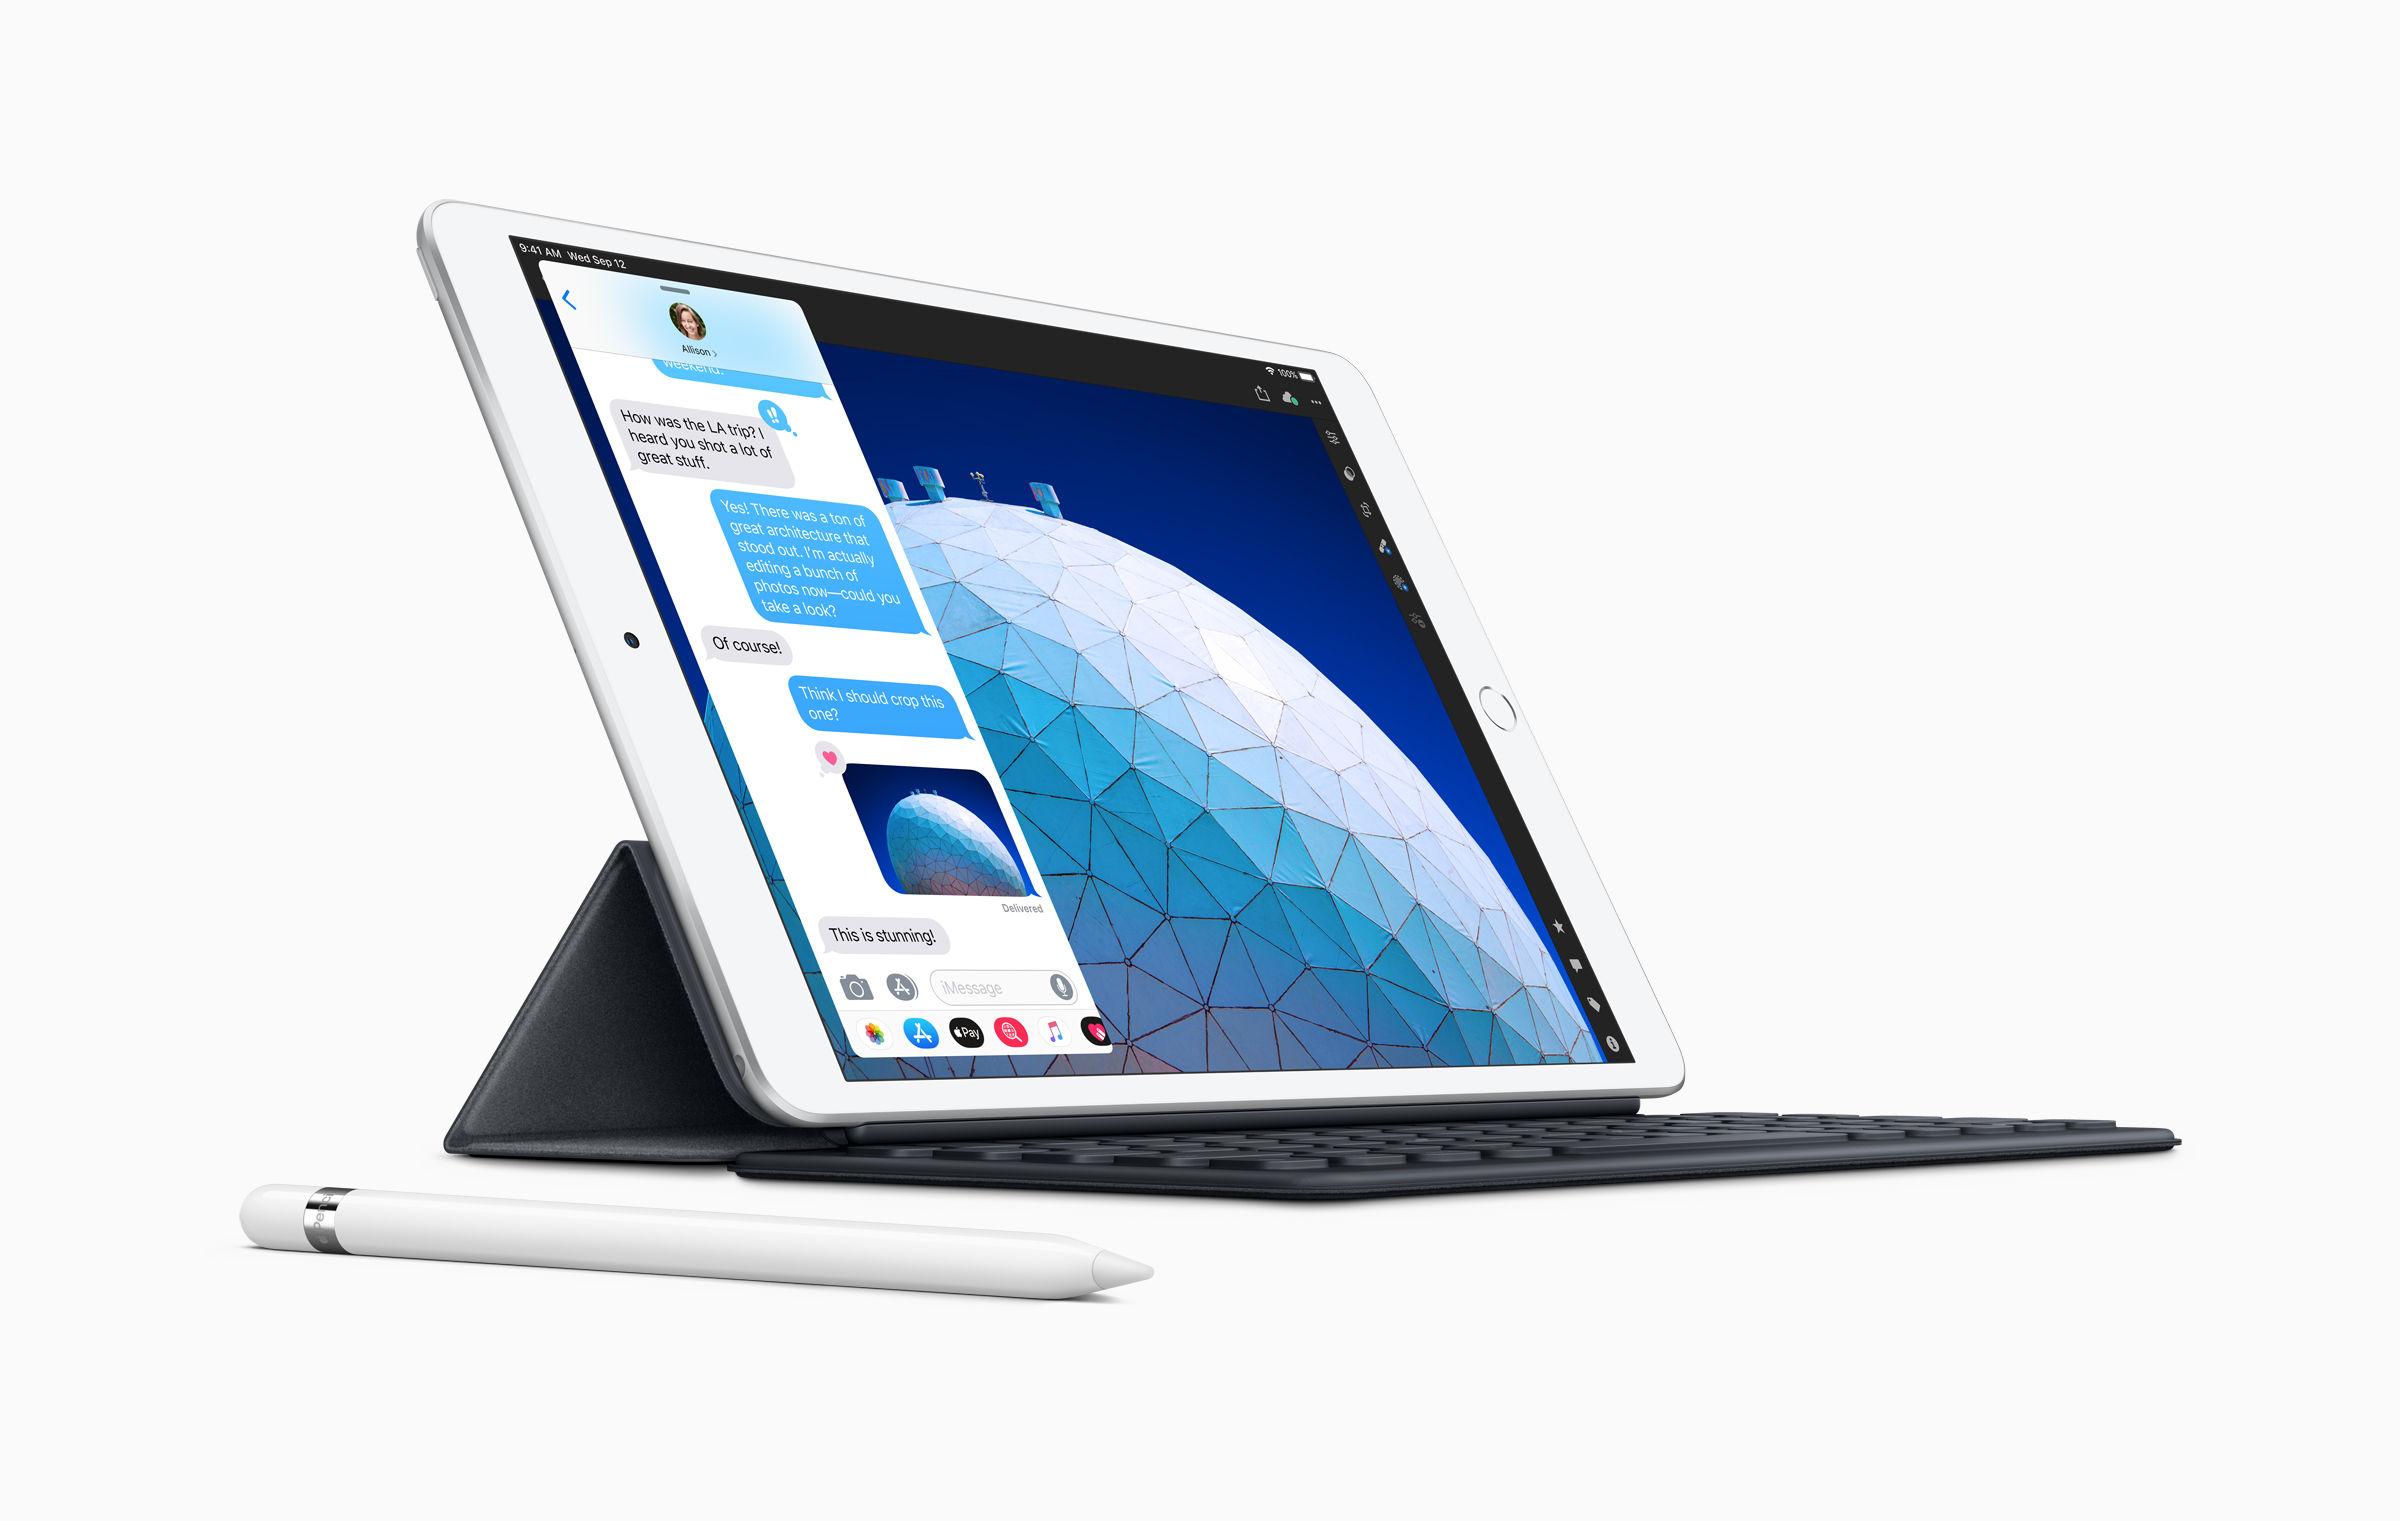 iPad Air (2019) and iPad Mini (2019) with A12 Bionic Chip, Apple Pencil Support Launched: Price, Features - MySmartPrice